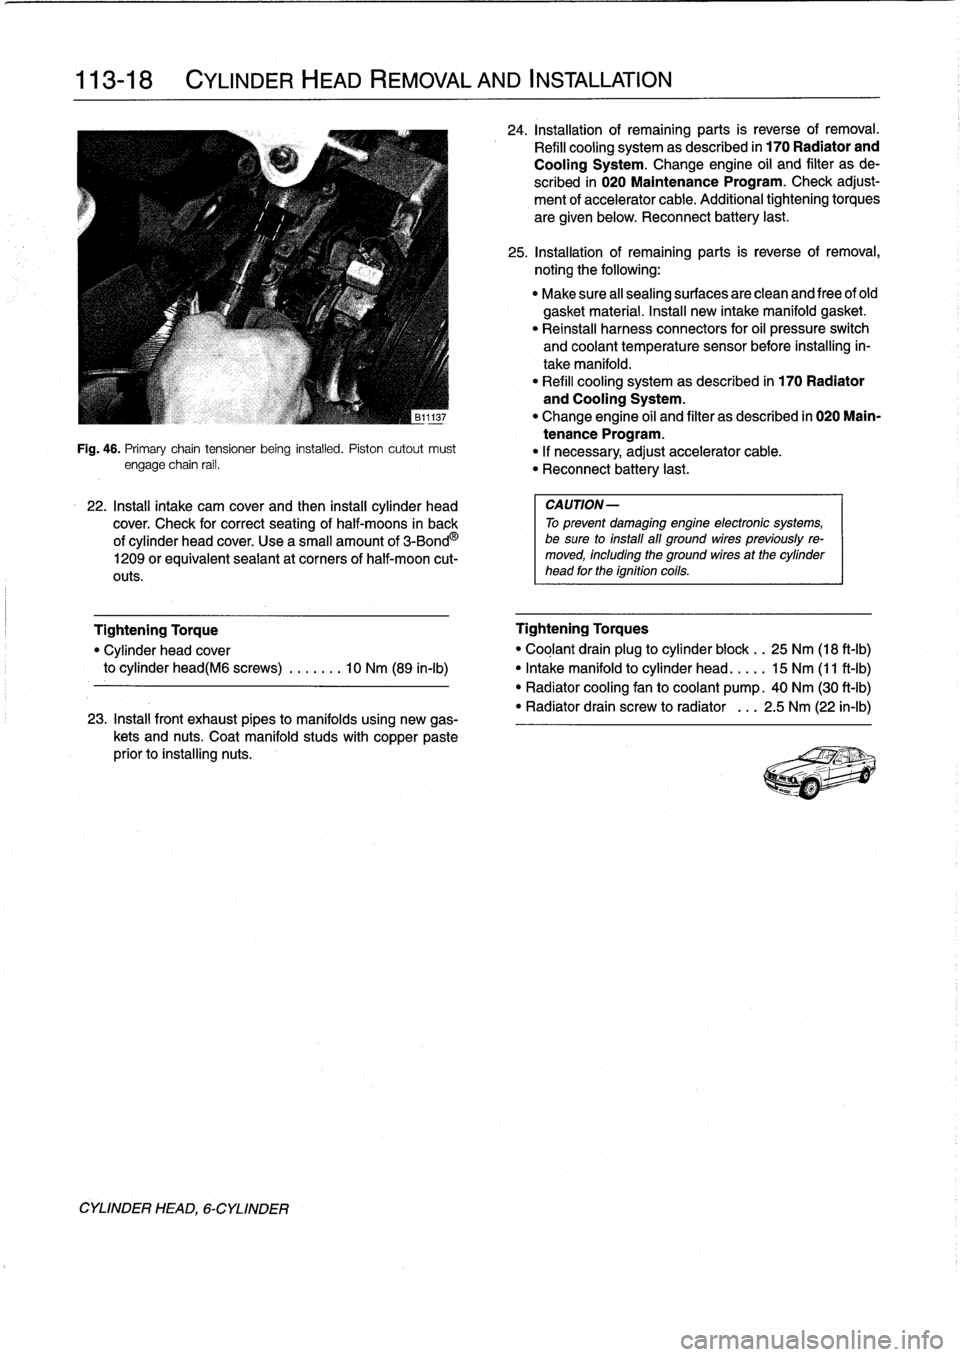 BMW 328i 1993 E36 Owners Manual 
113-
1
8

	

CYLINDER
HEAD
REMOVAL
AND
INSTALLATION

CYLINDER
HEAD,
6-CYLINDER

Fig
.
46
.
Primary
chaintensioner
being
installed
.
Piston
cutout
must
engage
chain
rail
.

22
.
Install
intake
cam
cov